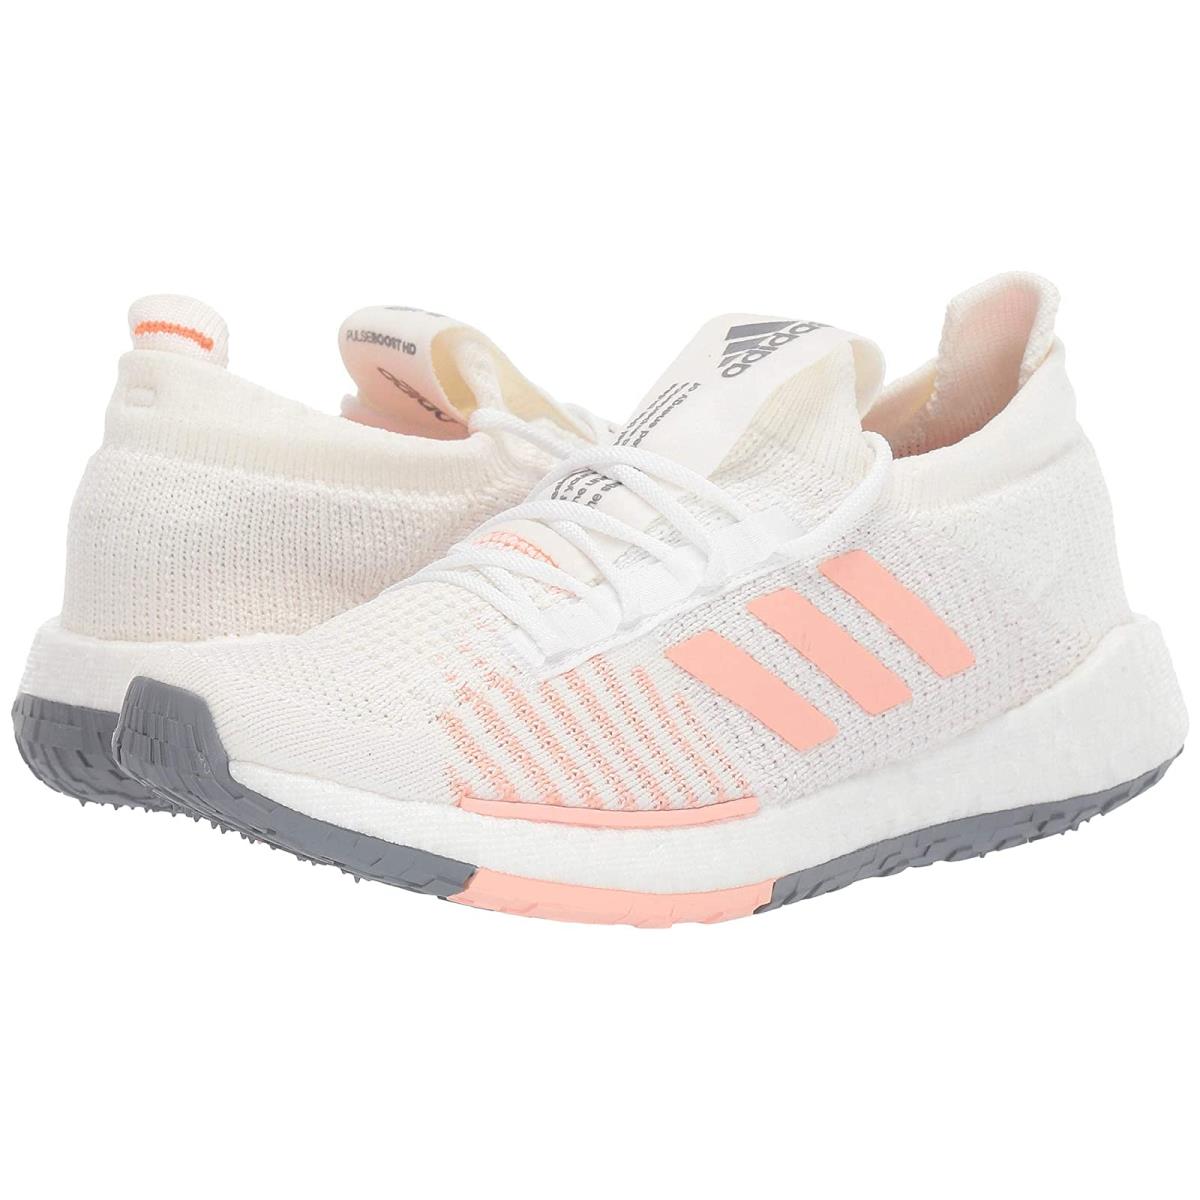 Woman`s Sneakers Athletic Shoes Adidas Running Pulseboost HD Core White/Glow Pink/Orchid Tint 1